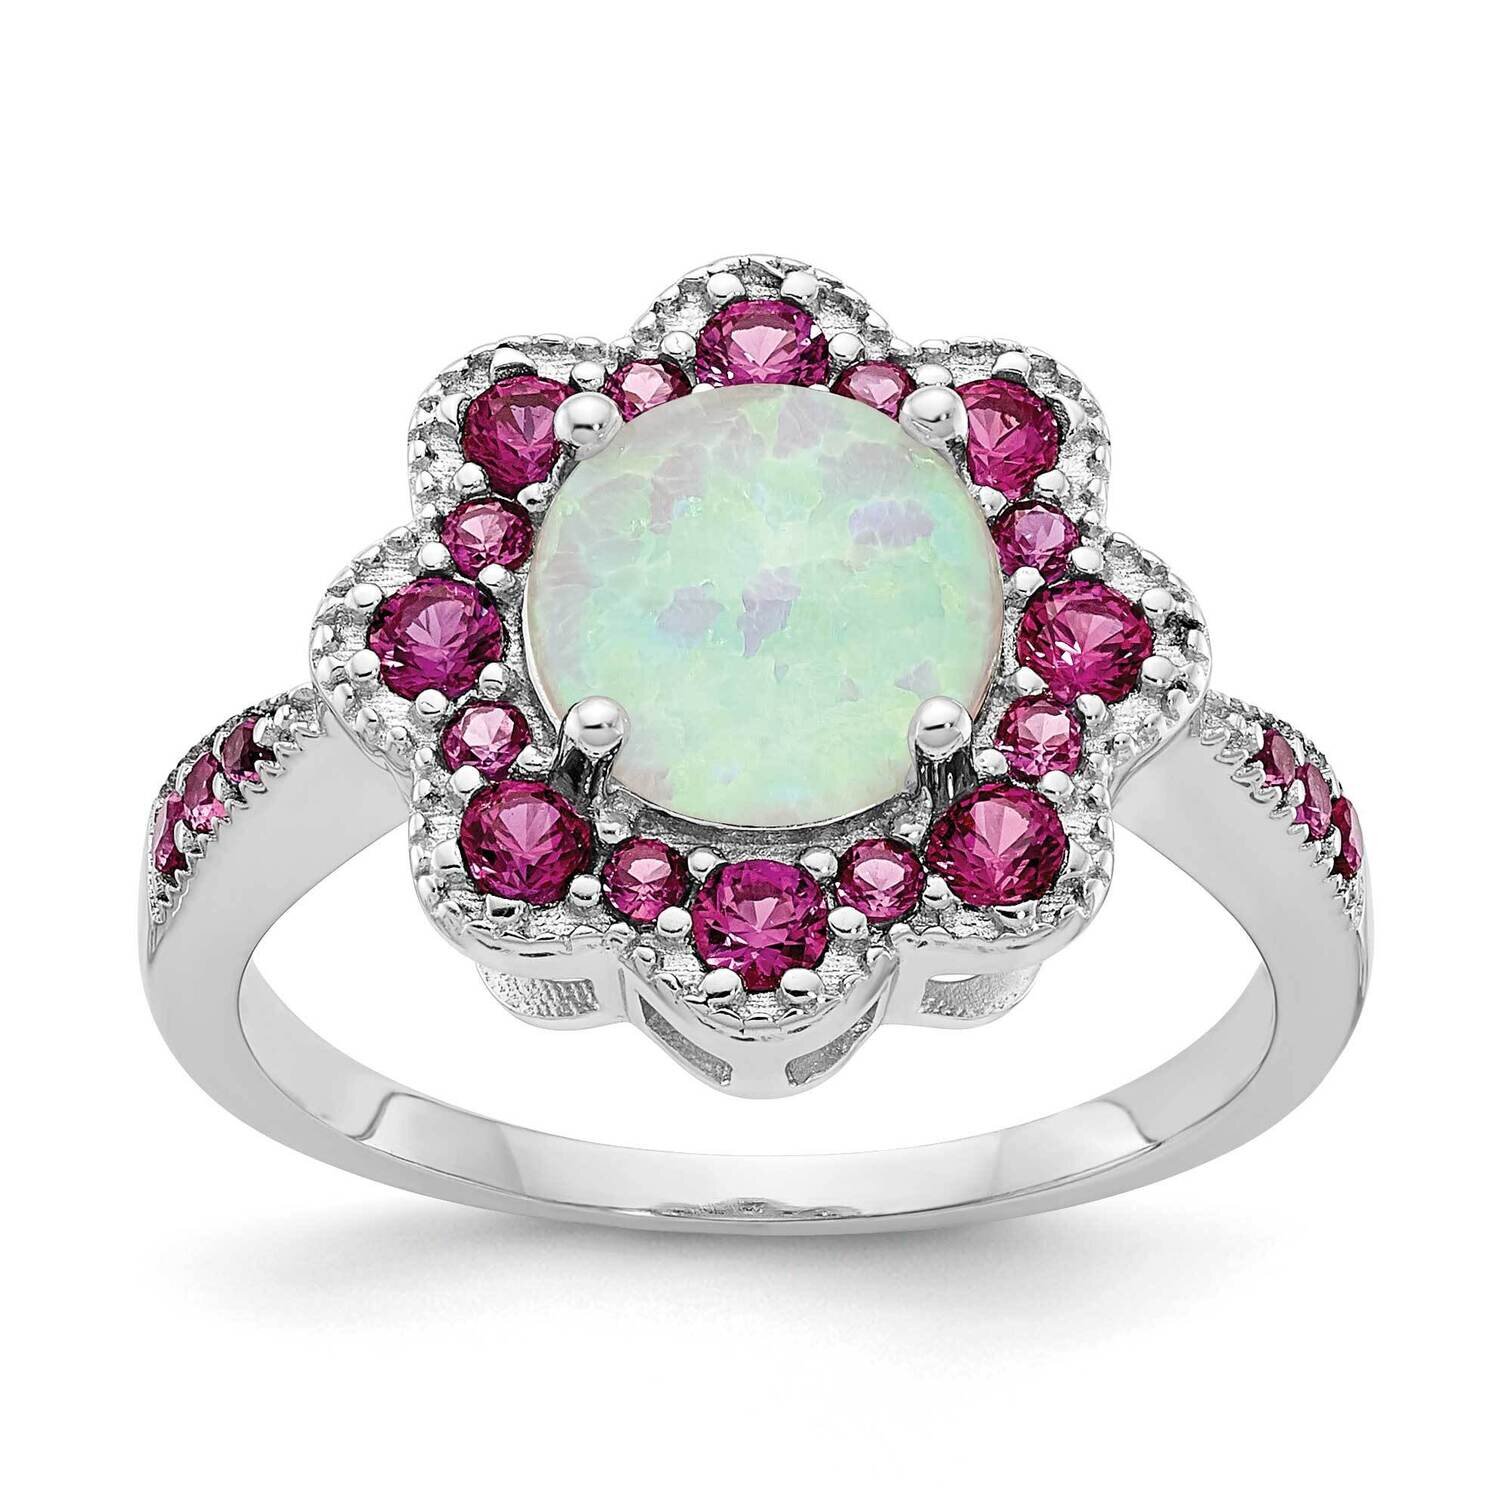 Cheryl M Created Opal Red Nano Crystal Flower Ring Sterling Silver Rhodium-plated QCM1569-6